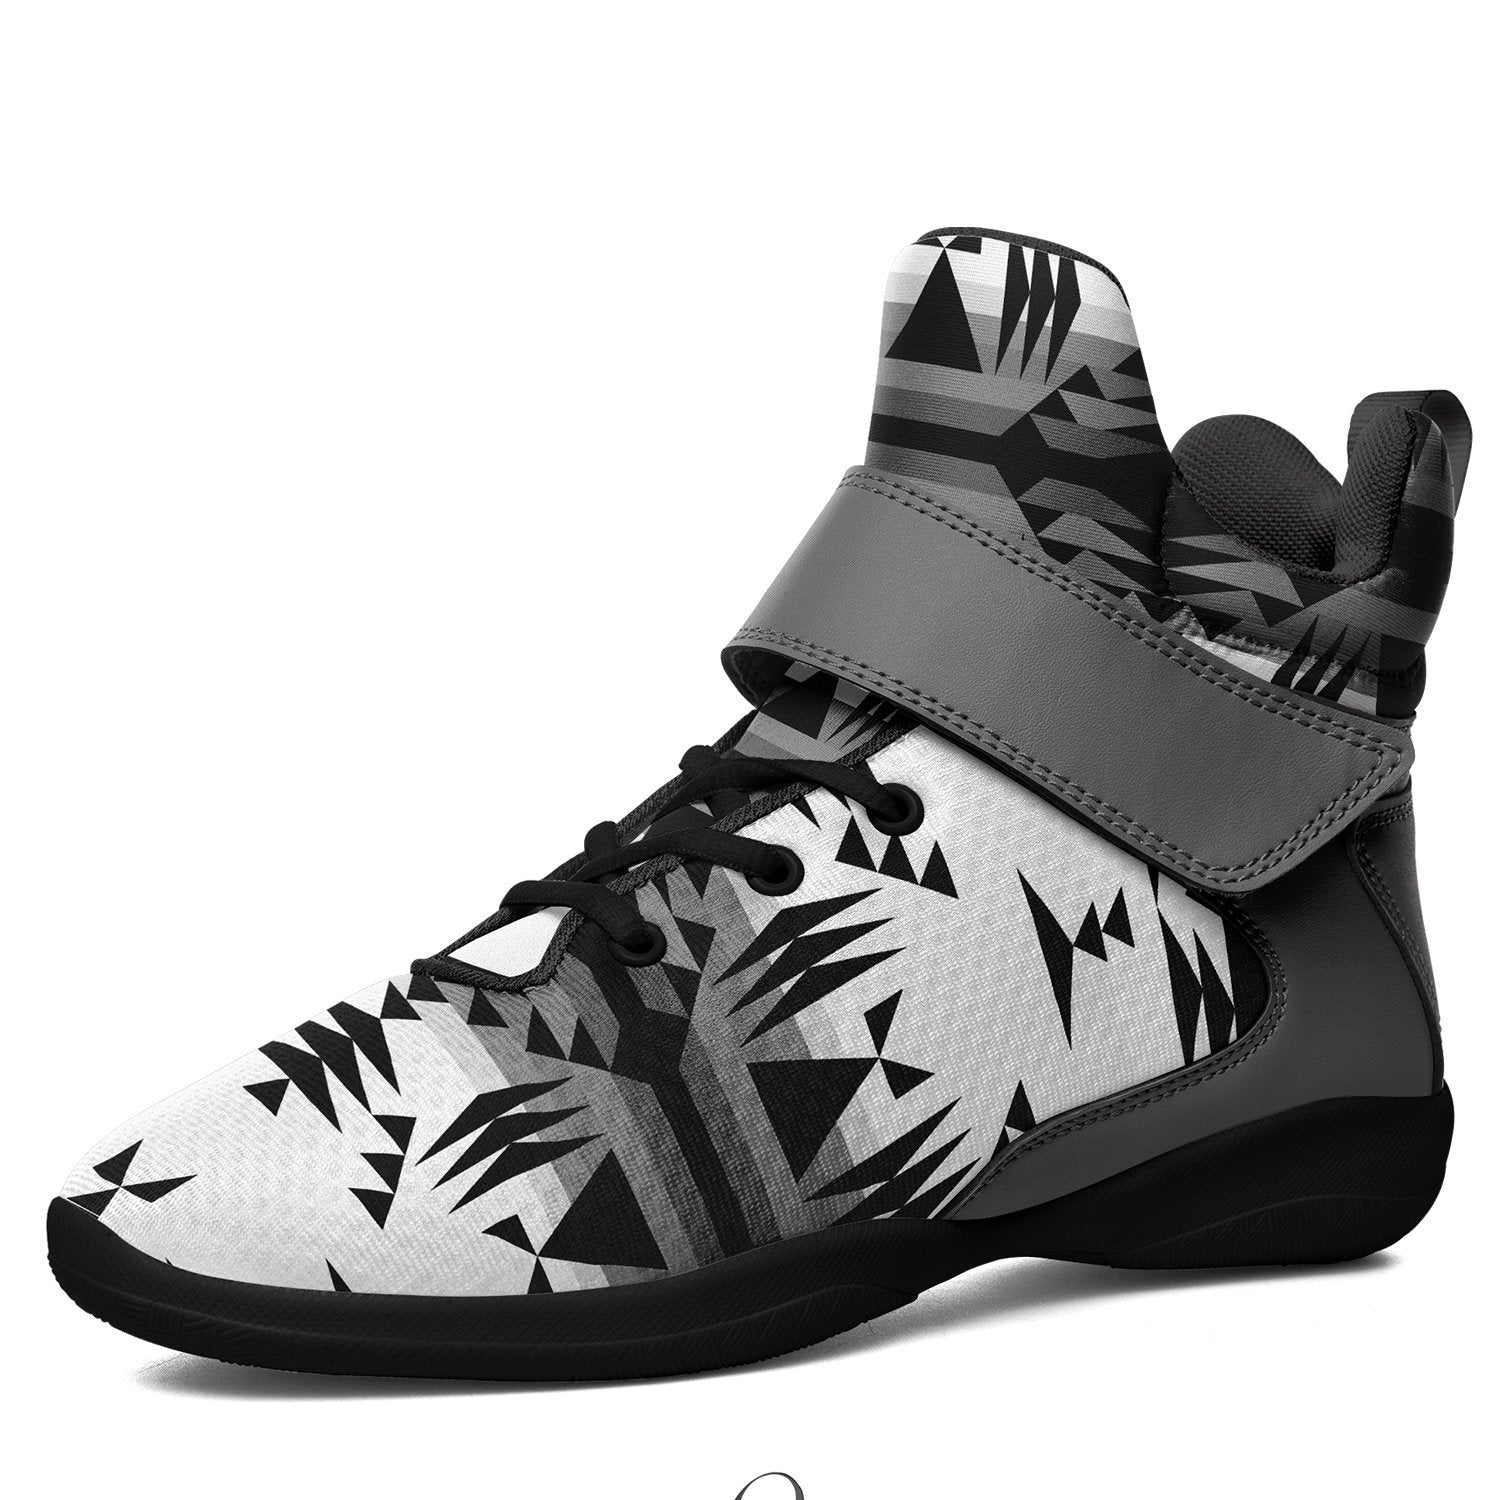 Between the Mountains White and Black Kid's Ipottaa Basketball / Sport High Top Shoes 49 Dzine US Child 12.5 / EUR 30 Black Sole with Gray Strap 